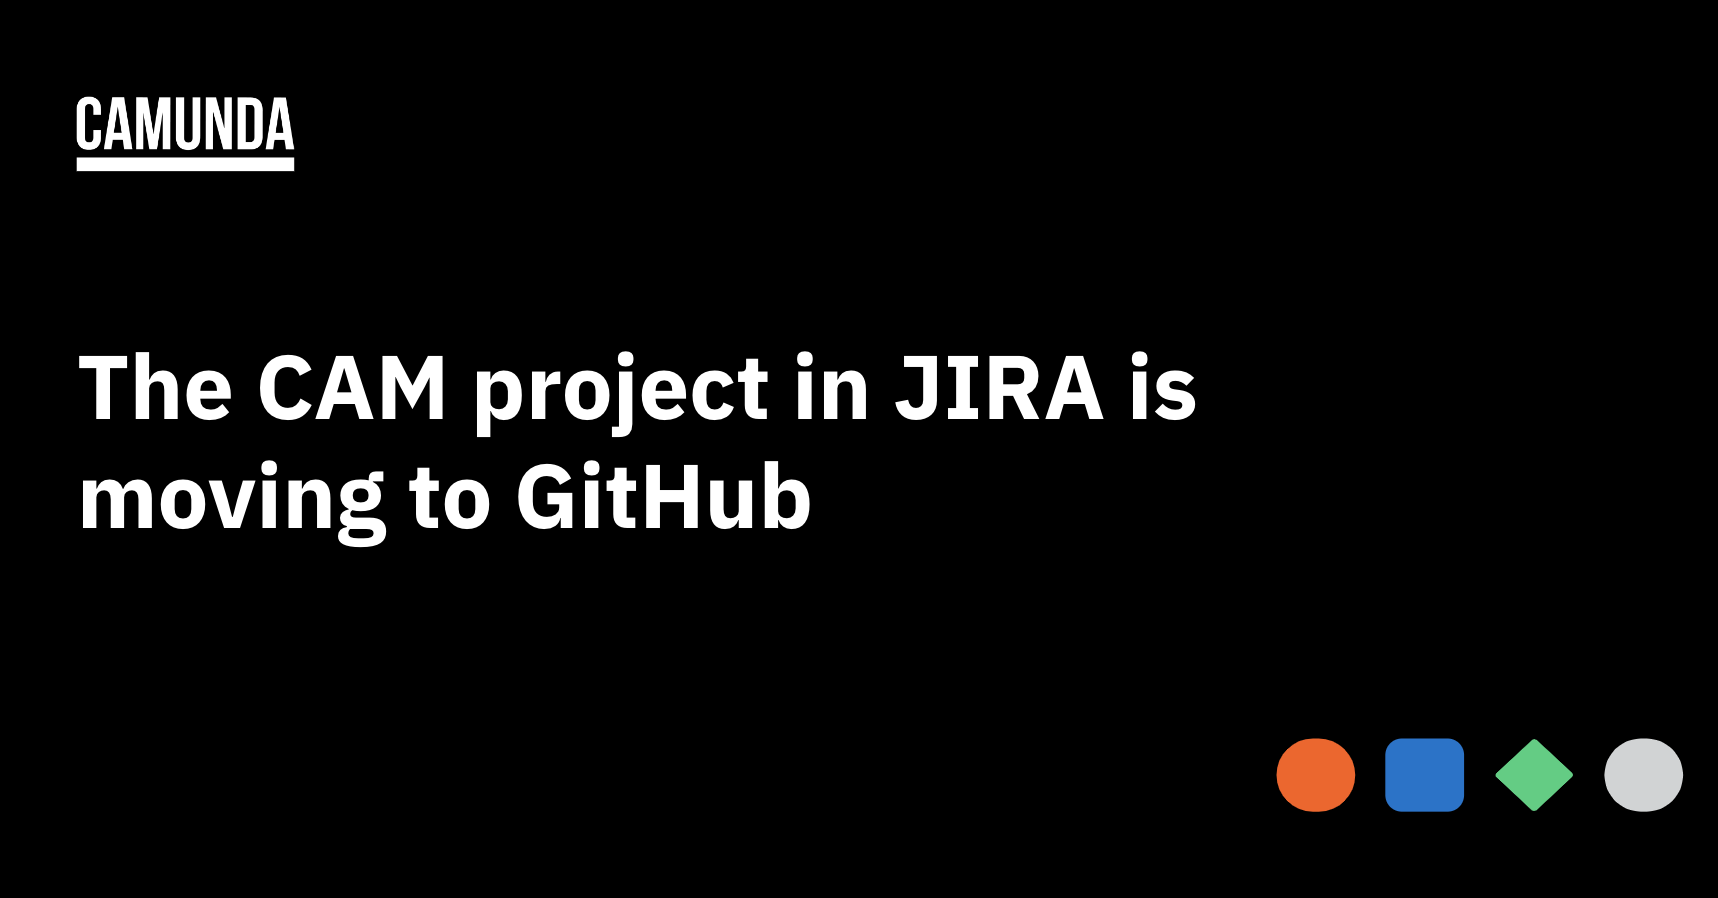 The CAM project in JIRA is moving to GitHub